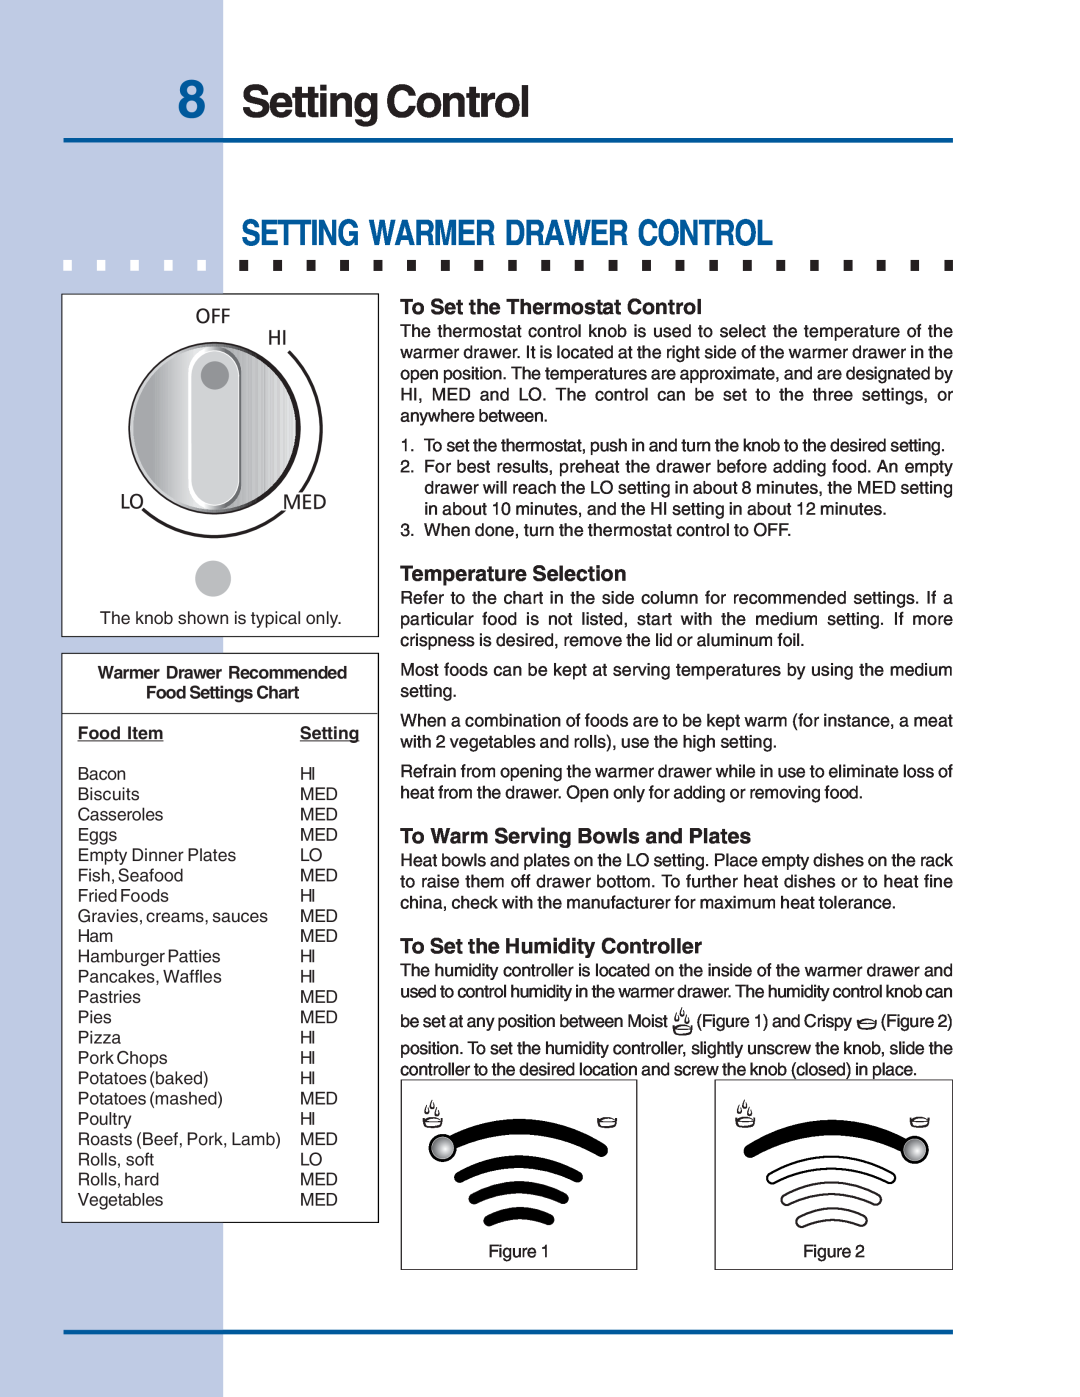 Electrolux Warm & Serve Drawer manual Setting Control, To Set the Thermostat Control, Temperature Selection 